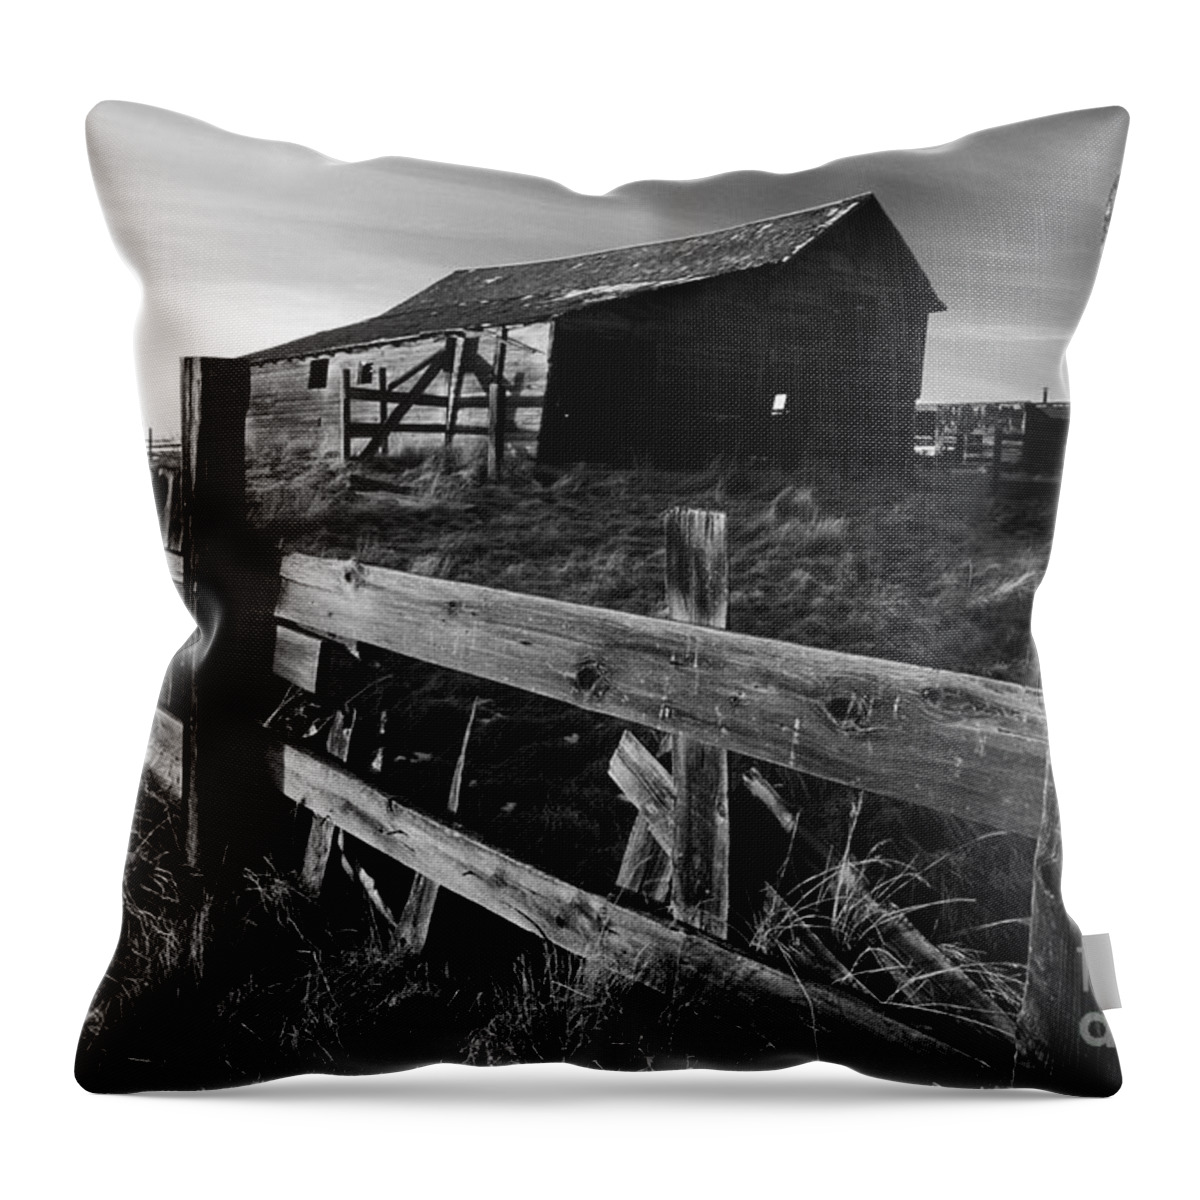  Deserted Throw Pillow featuring the photograph Not OK Corral by Bob Christopher